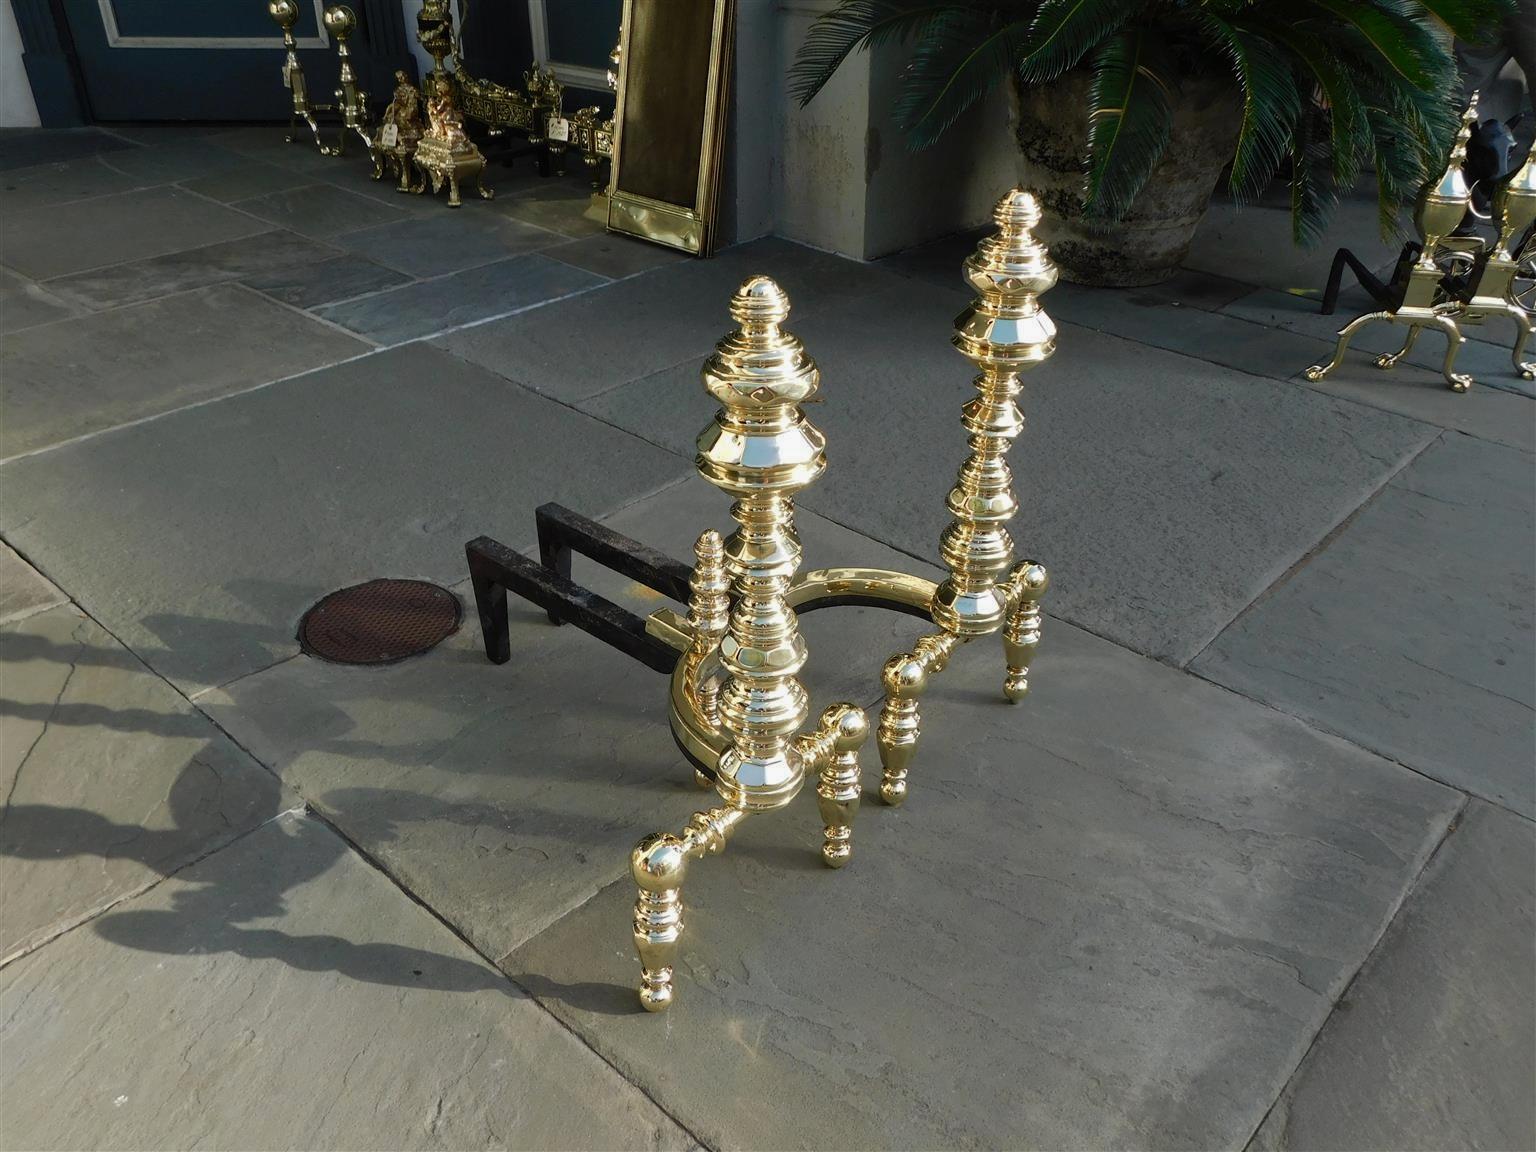 Pair of American brass flanking urn faceted finial andirons with bulbous squared faceted legs, matching faceted bulbous log stops, and resting on the original wrought iron rear dog legs, early 19th century Stamped by maker E. Smylie, New York.